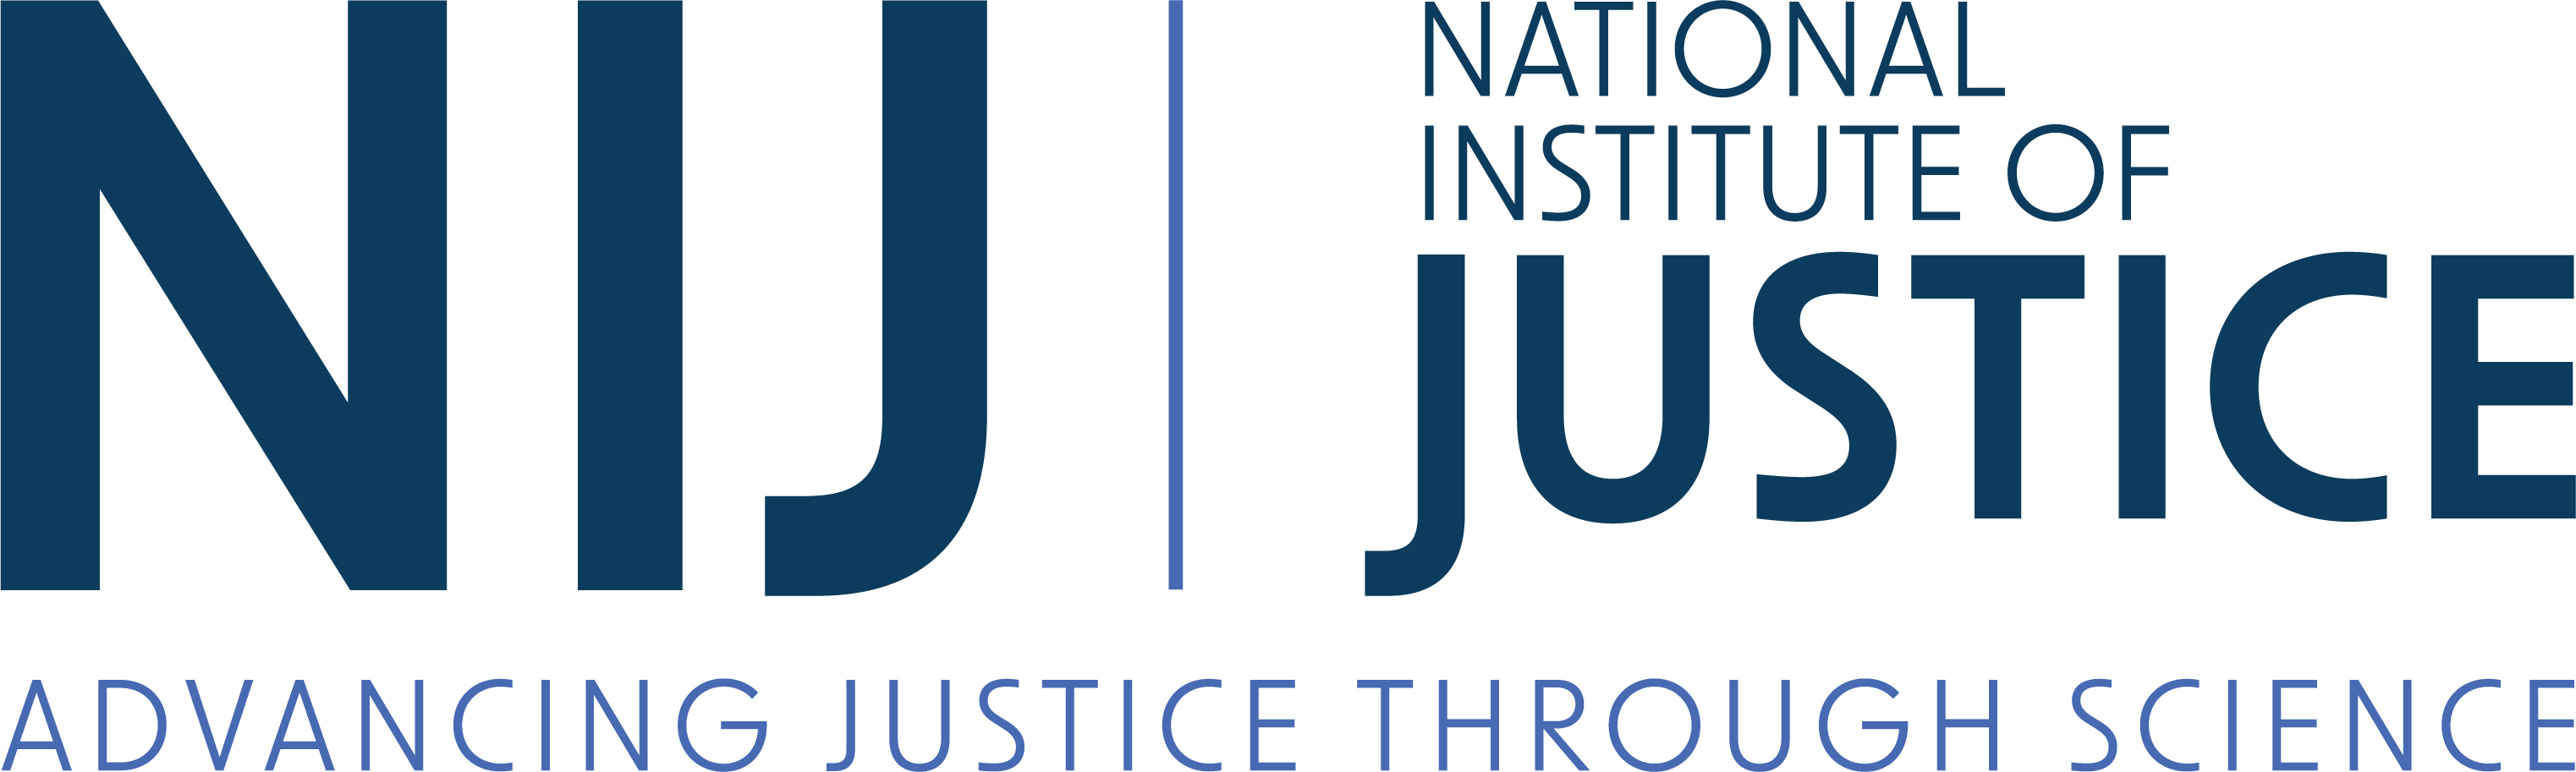 National Institute of Justice - Advancing Justice Through Science Logo